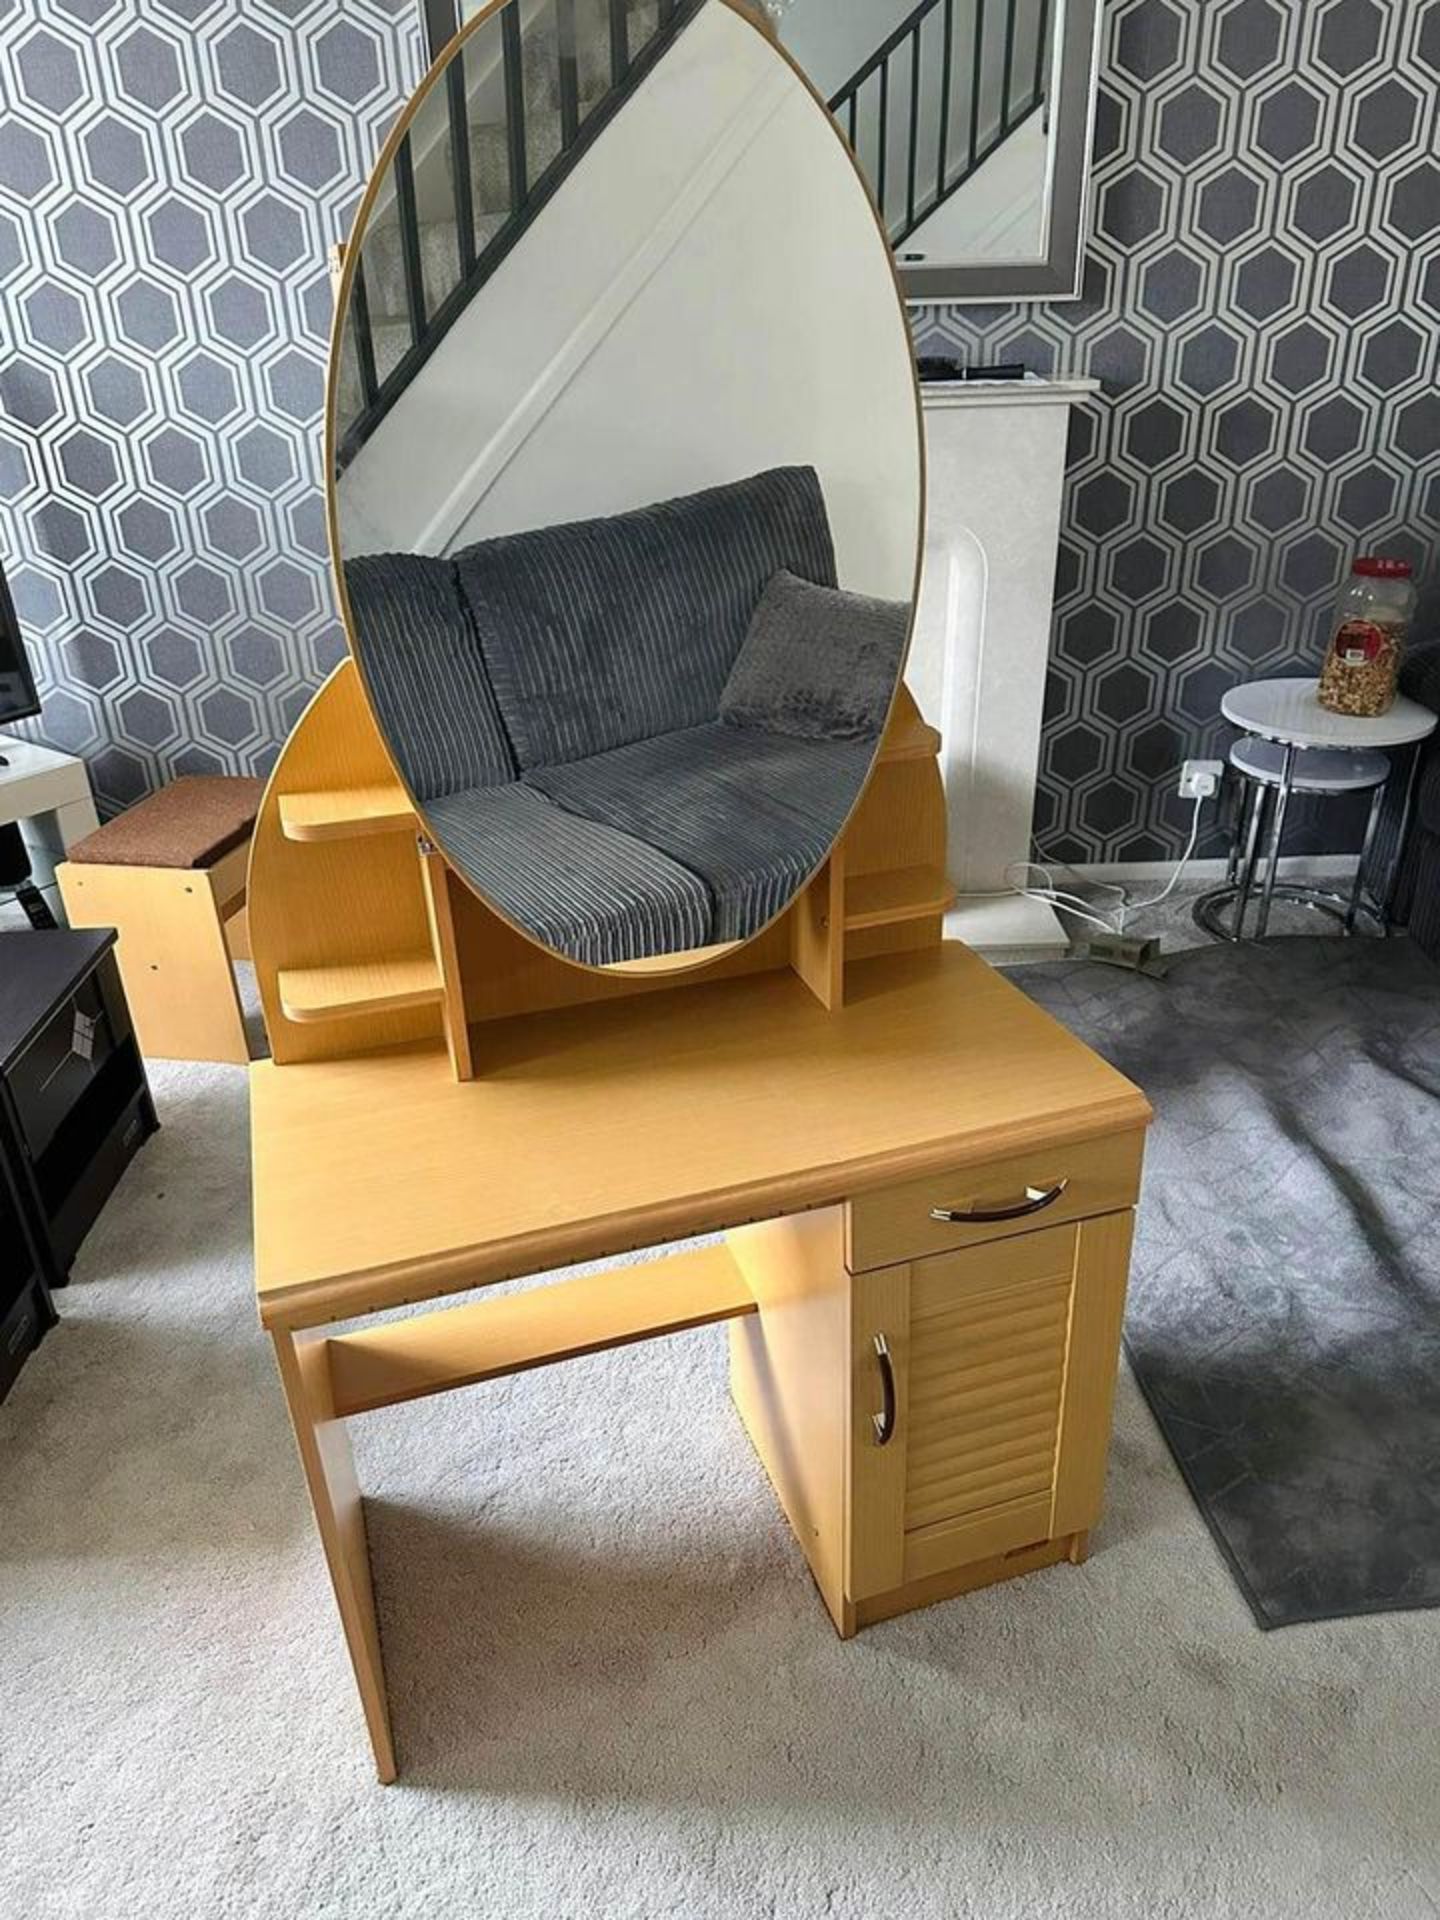 BRAND NEW SEALED DRESSING TABLE WITH STOOL AND MIRROR BRAND NEW BOXED ITEM - Image 4 of 8